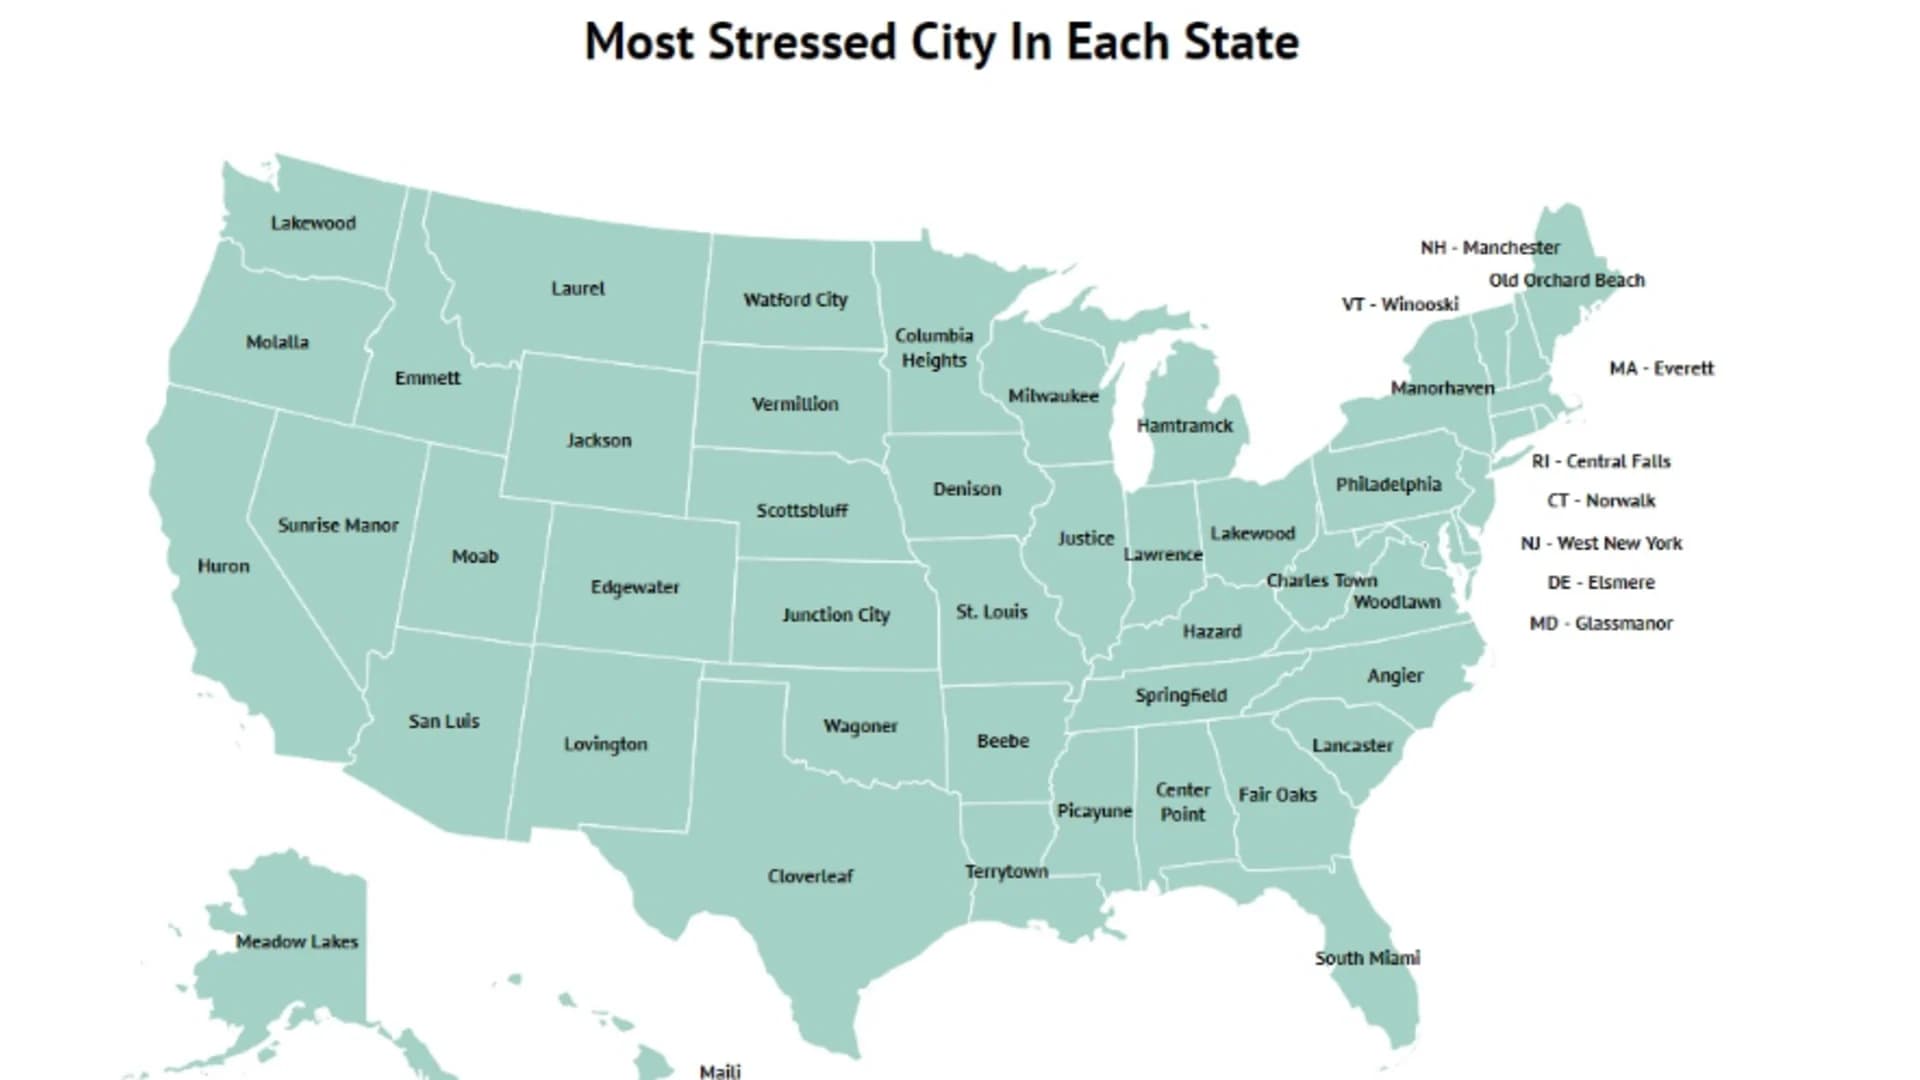 Survey says Norwalk most stressed city in CT